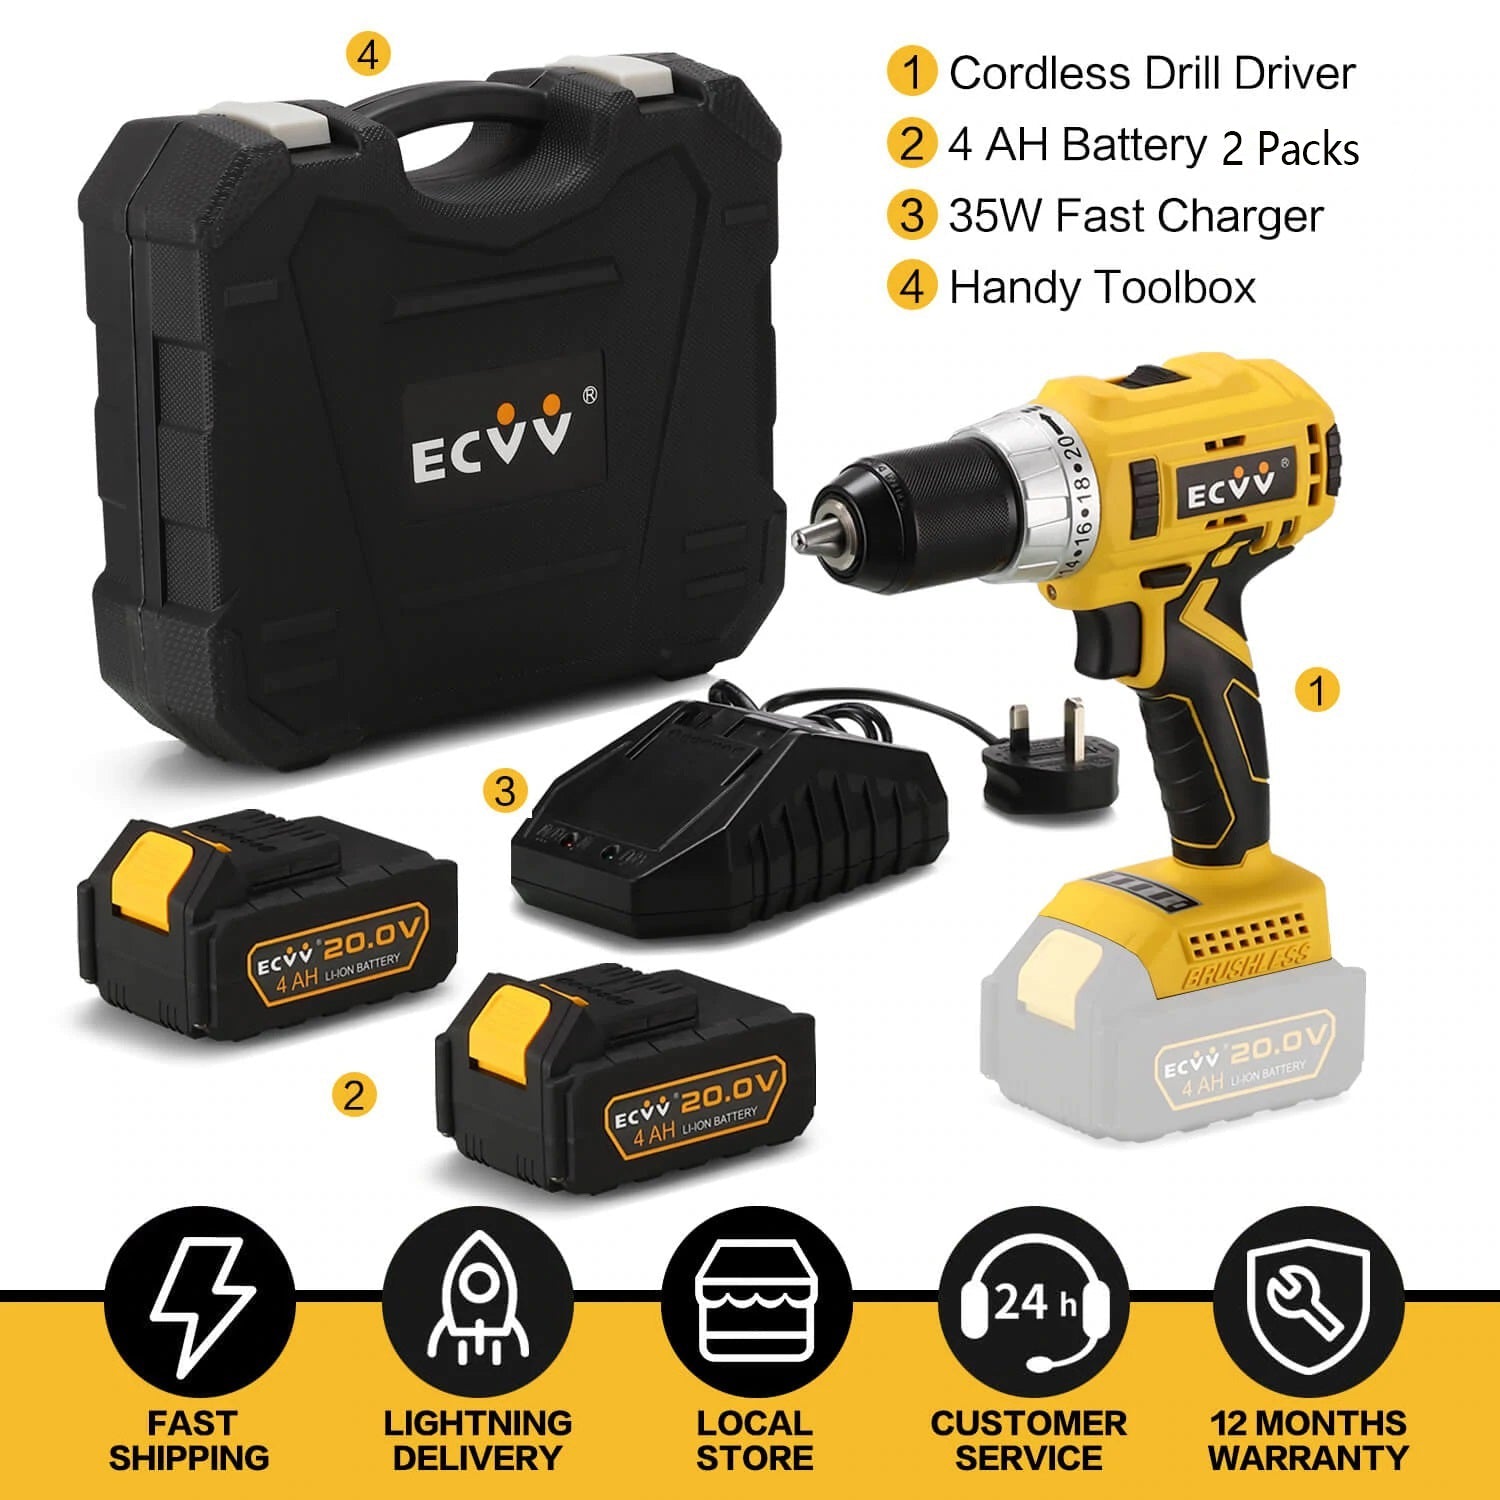 ECVV Cordless Drill Driver Kit 80Nm Torque 20V Brushless Driver 2-Variable Speed with Fast Charger 13mm Metal Chuck for Fastening and Drilling